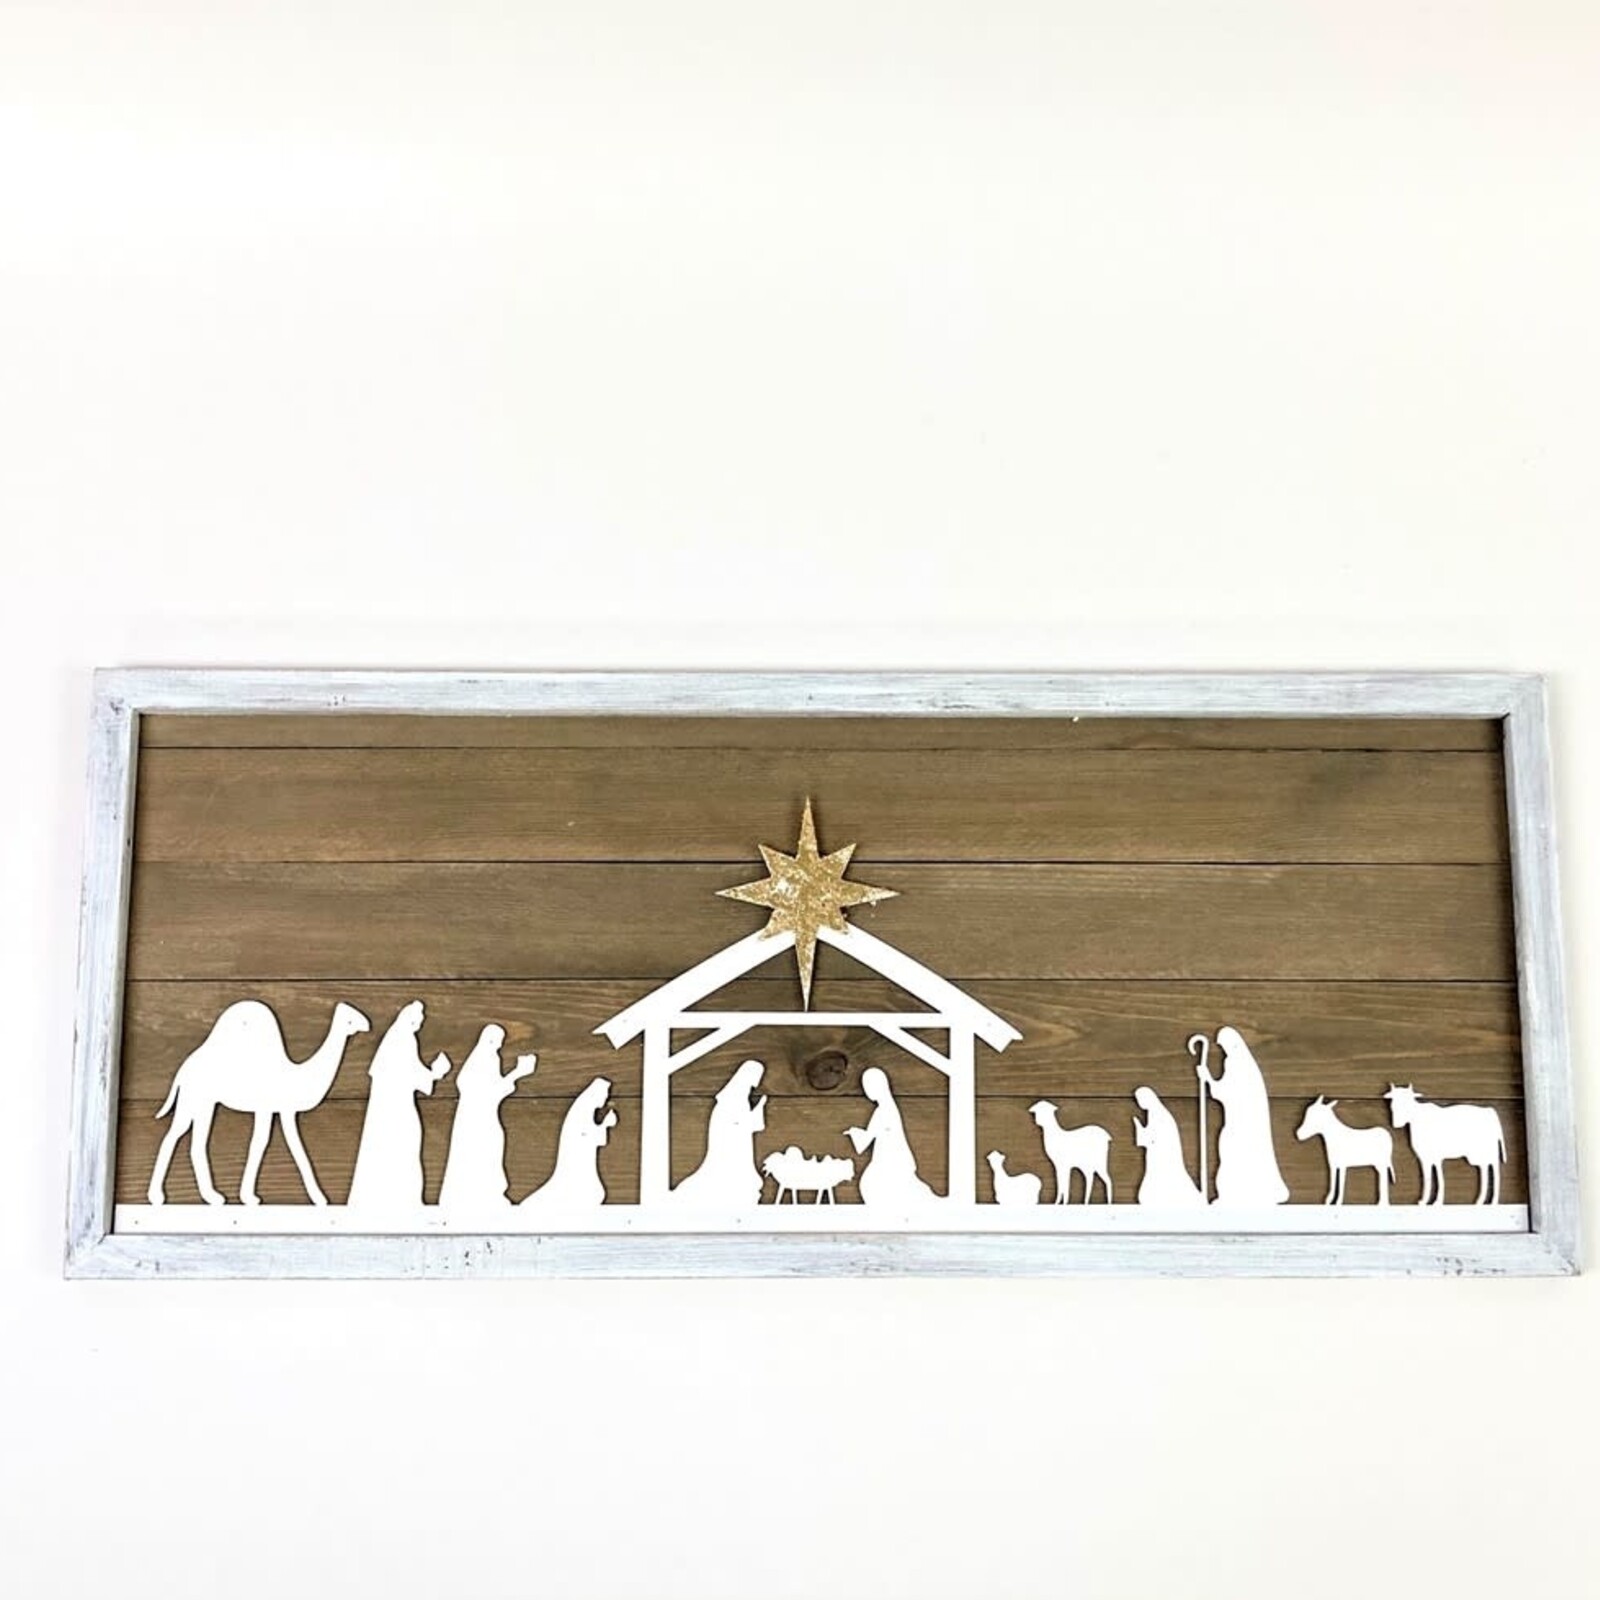 Trade Cie 28x12" Layered Silhouette Nativity Wall Décor   CM4512 loading=